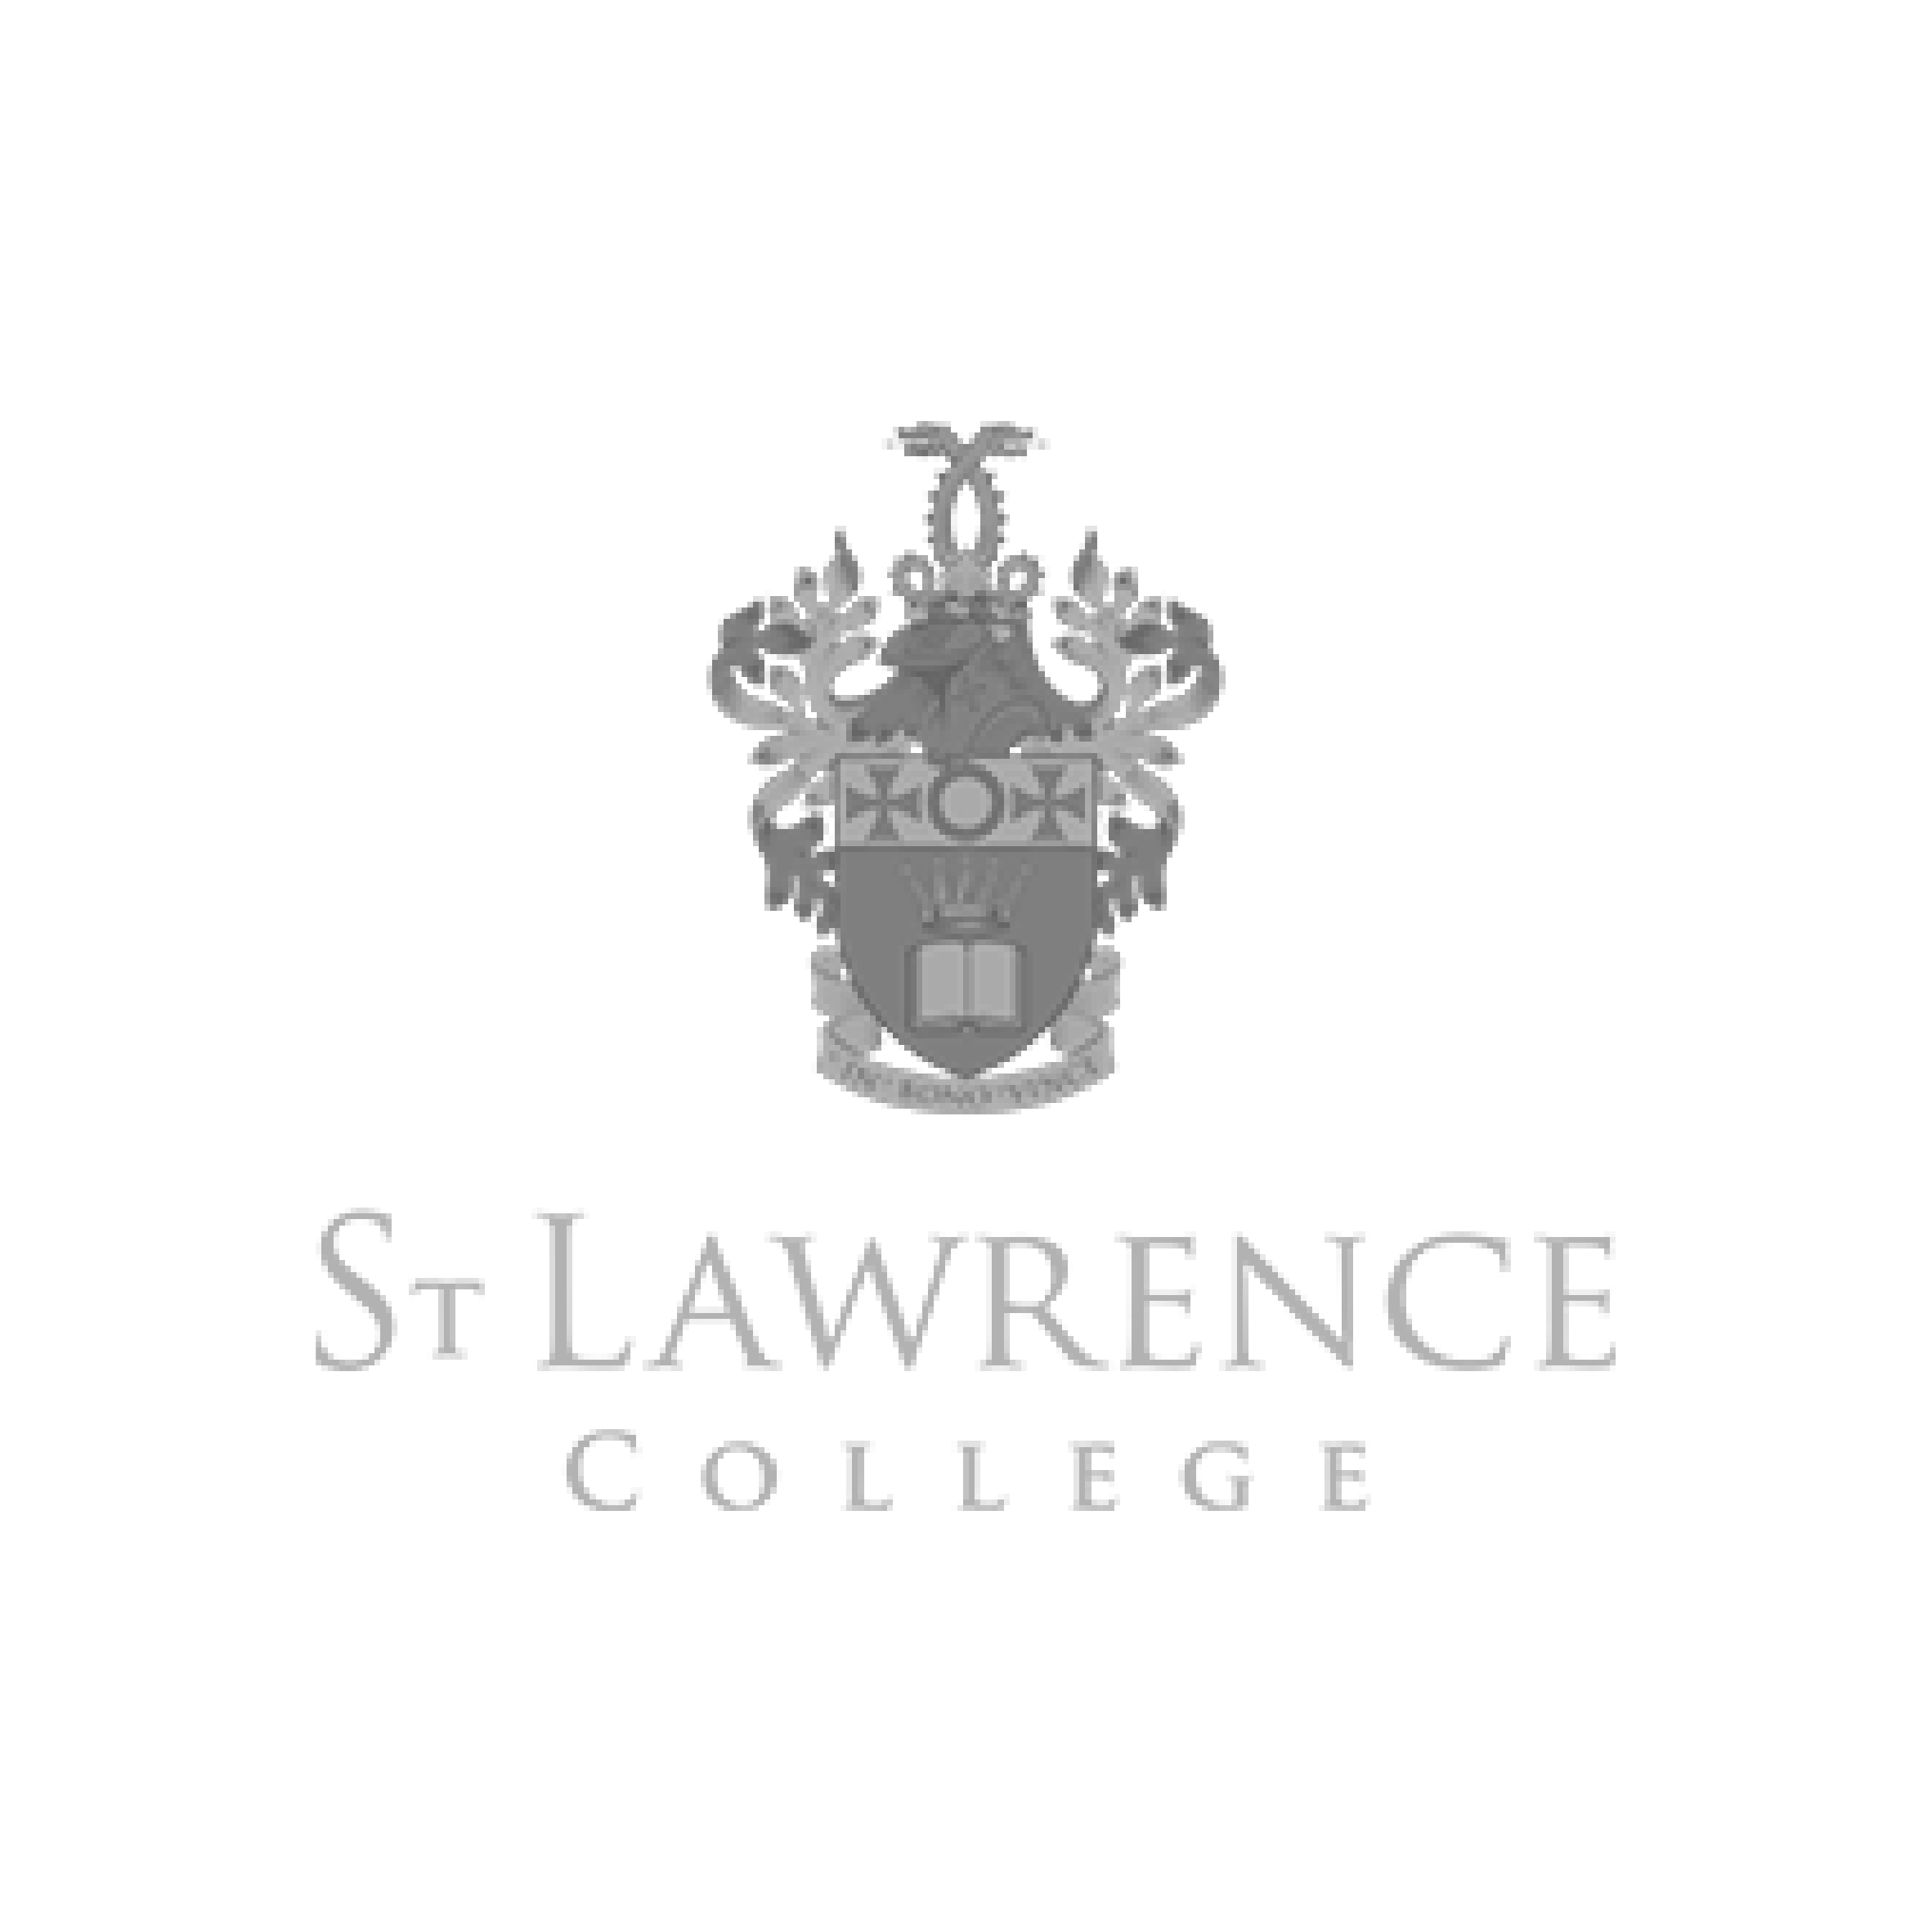 St Lawrence